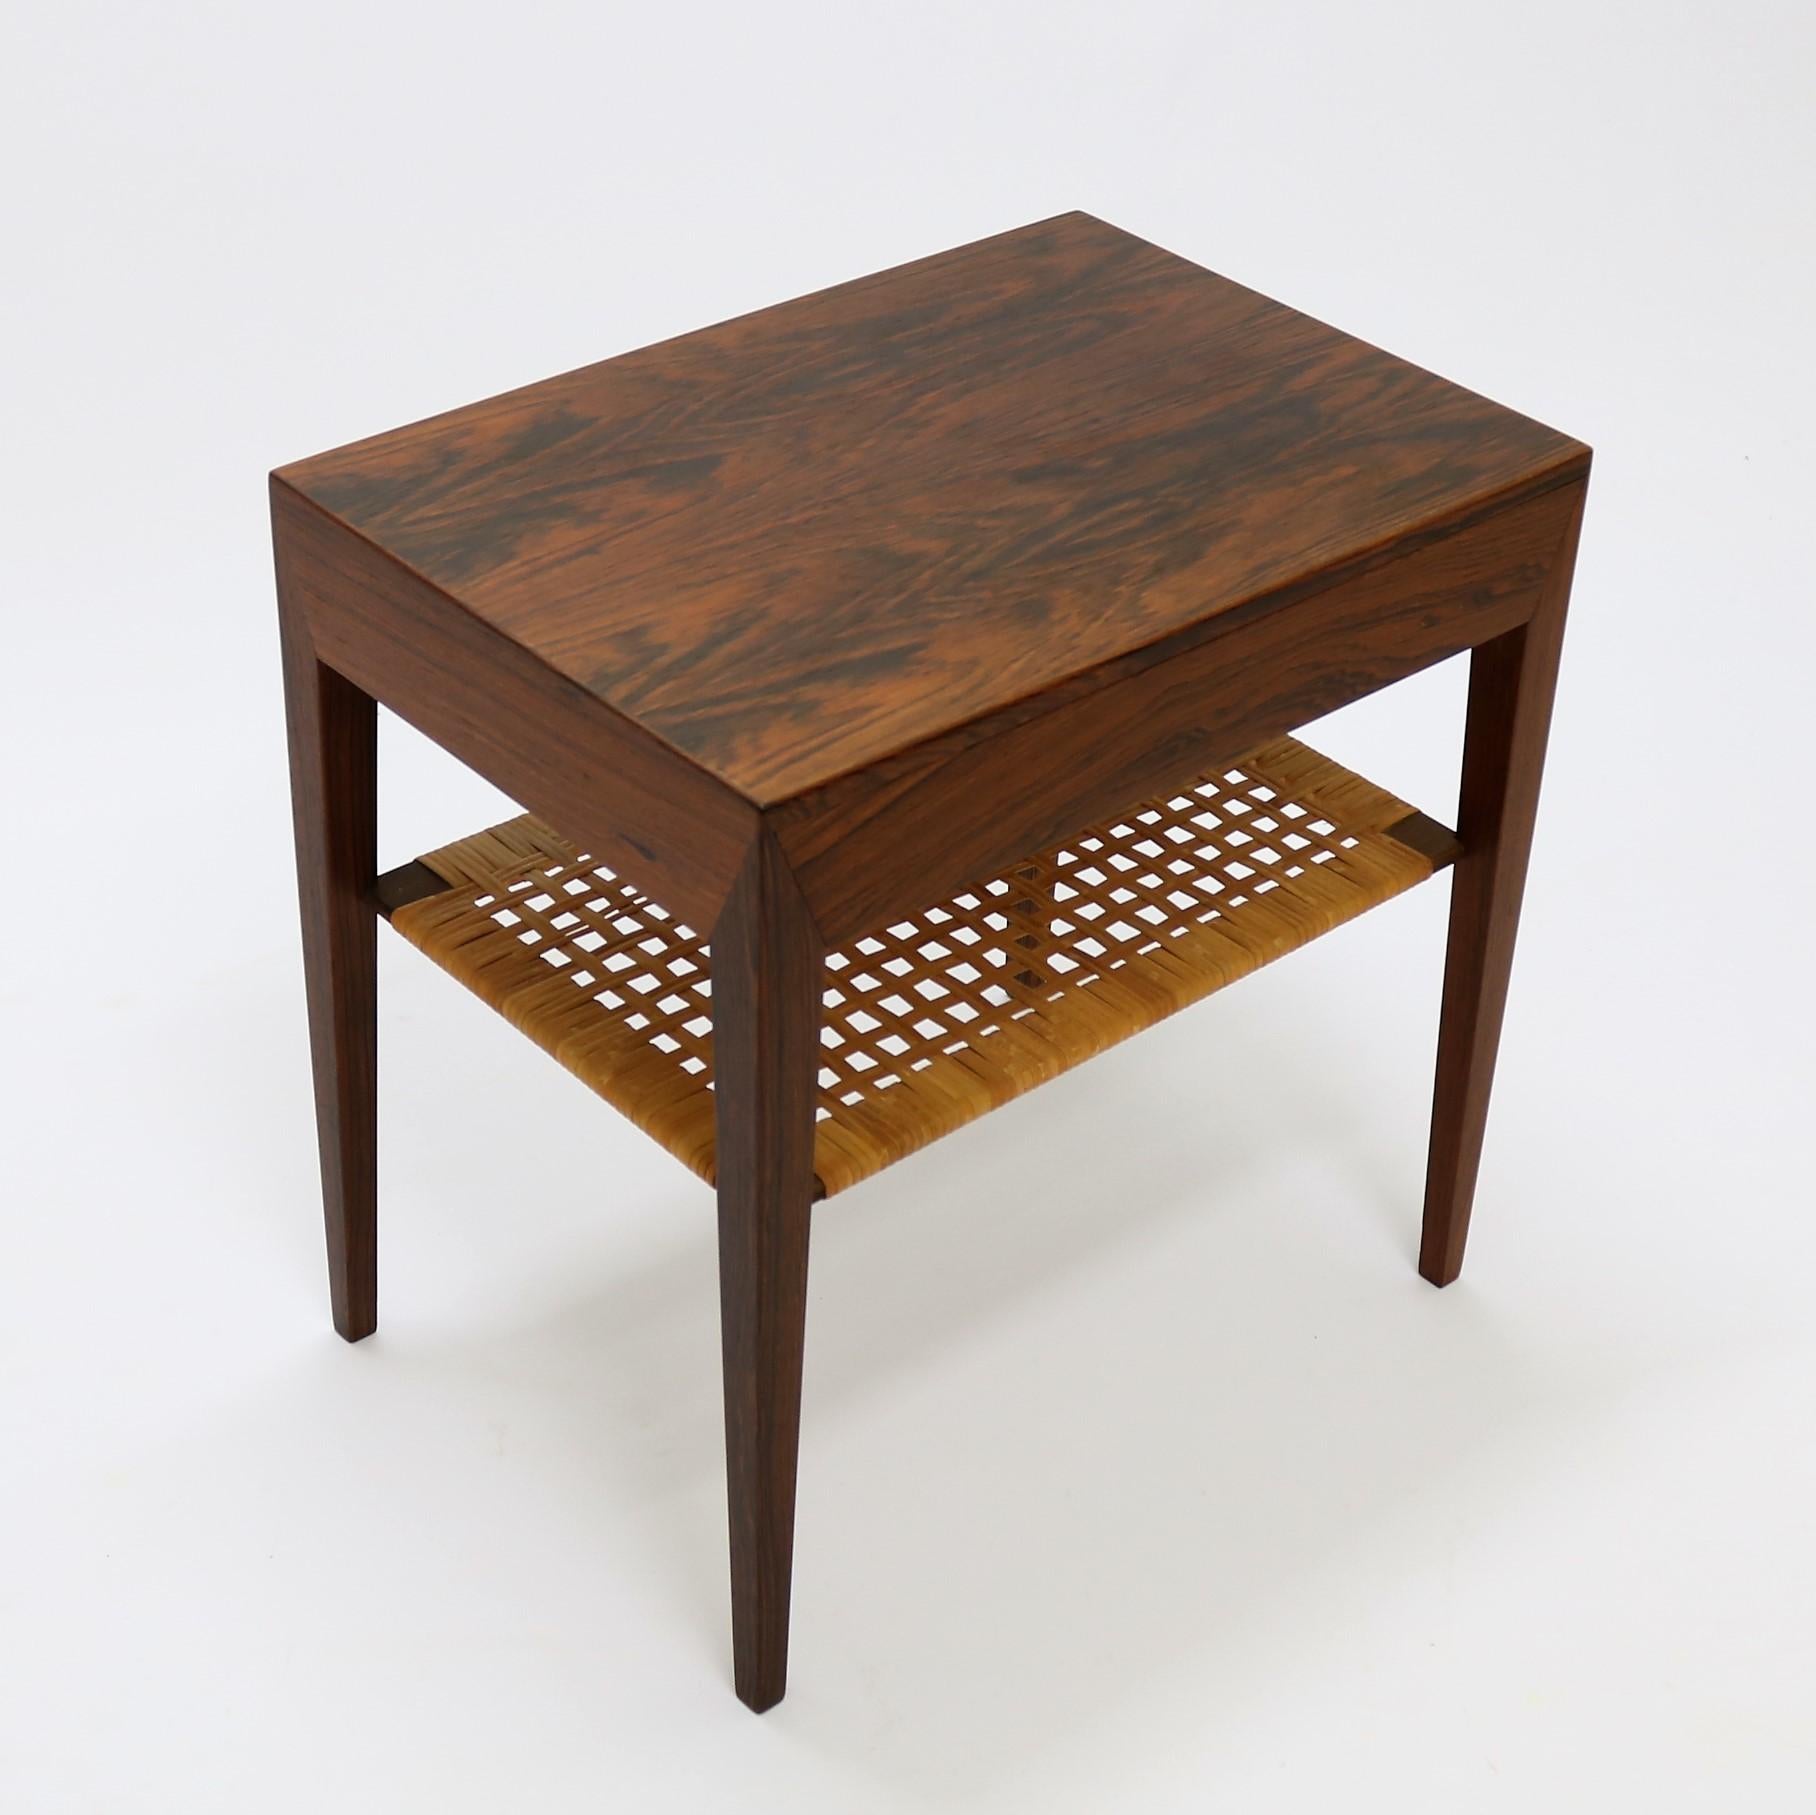 Mid-20th Century Rosewood Side Table with Shelf in Woven Cane by Severin Hansen, Denmark, 1960s